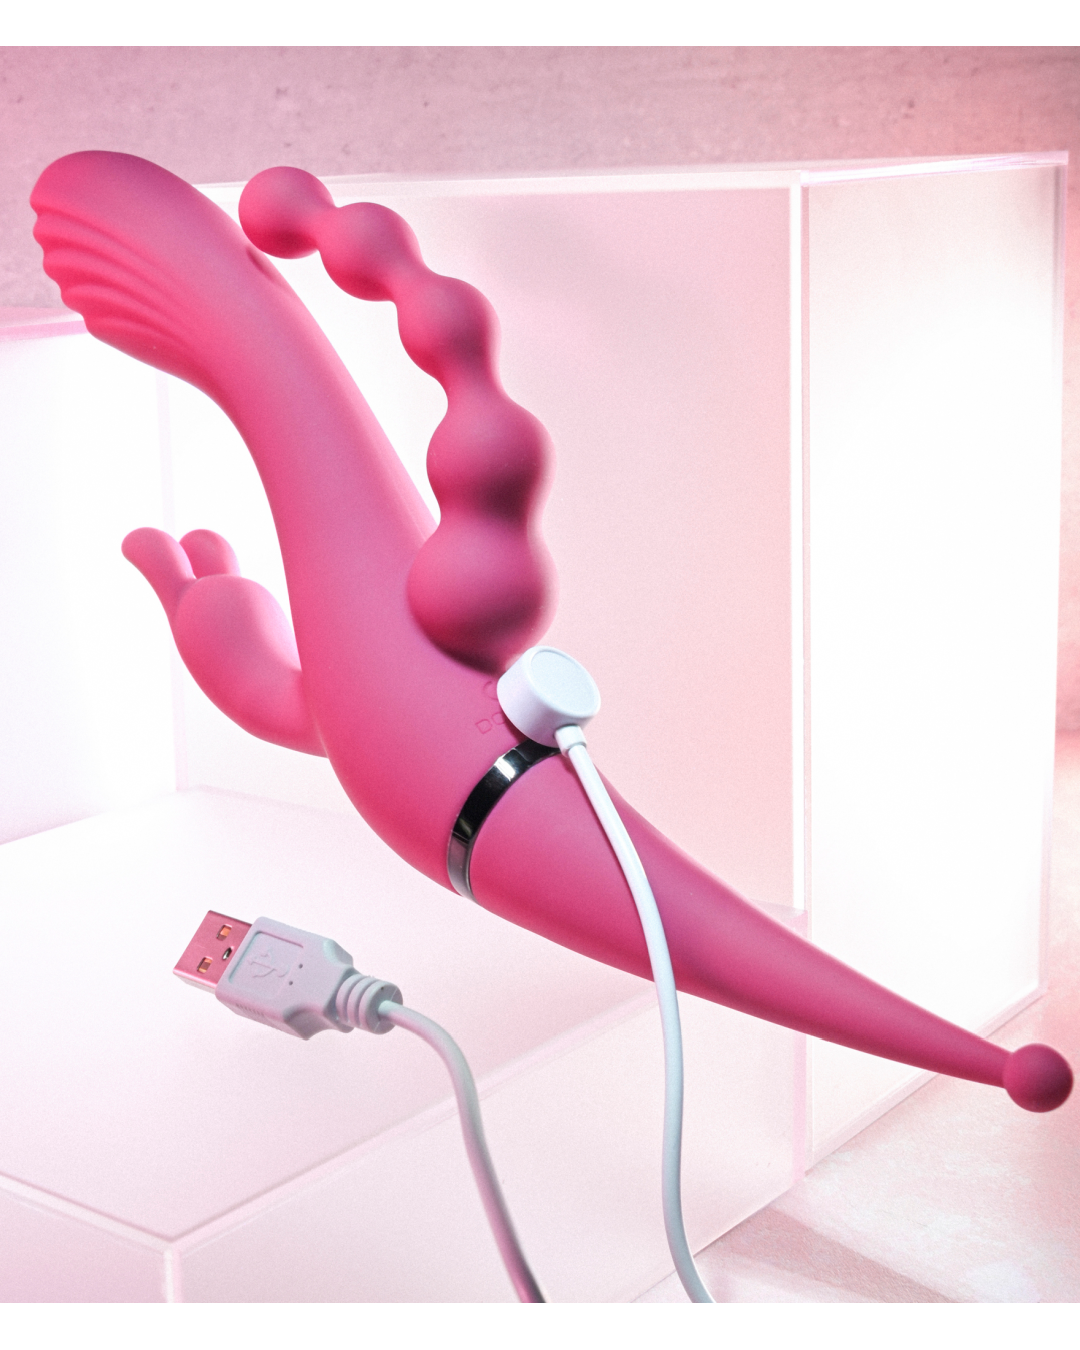 Four By Four Quadruple Stimulation Vibrator and charger cord